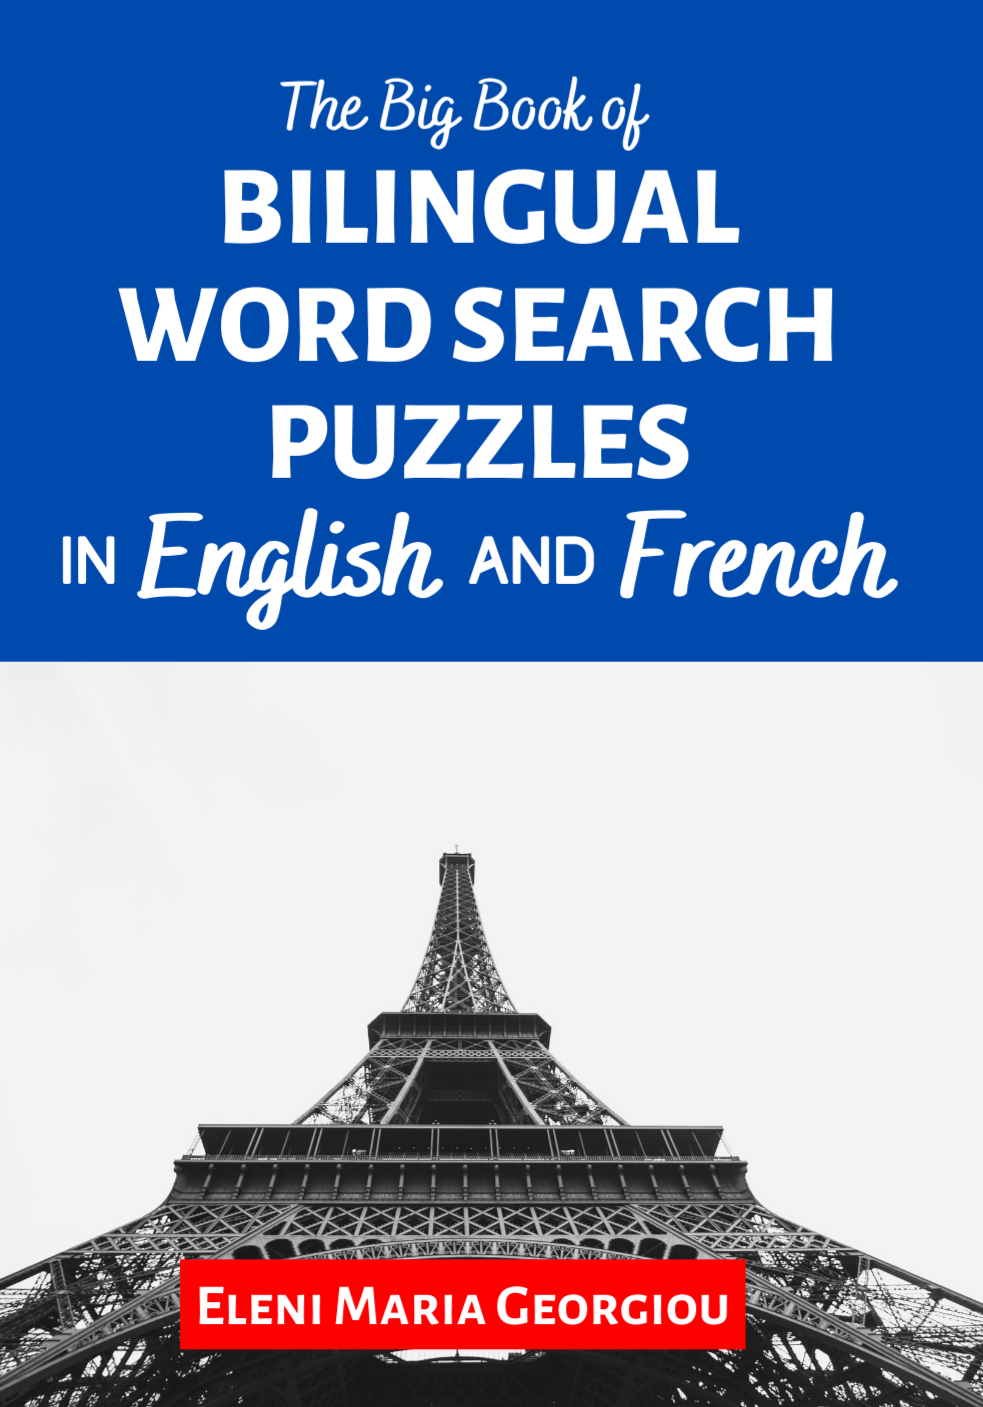 The Big Book of Bilingual Word Search Puzzles in English and French